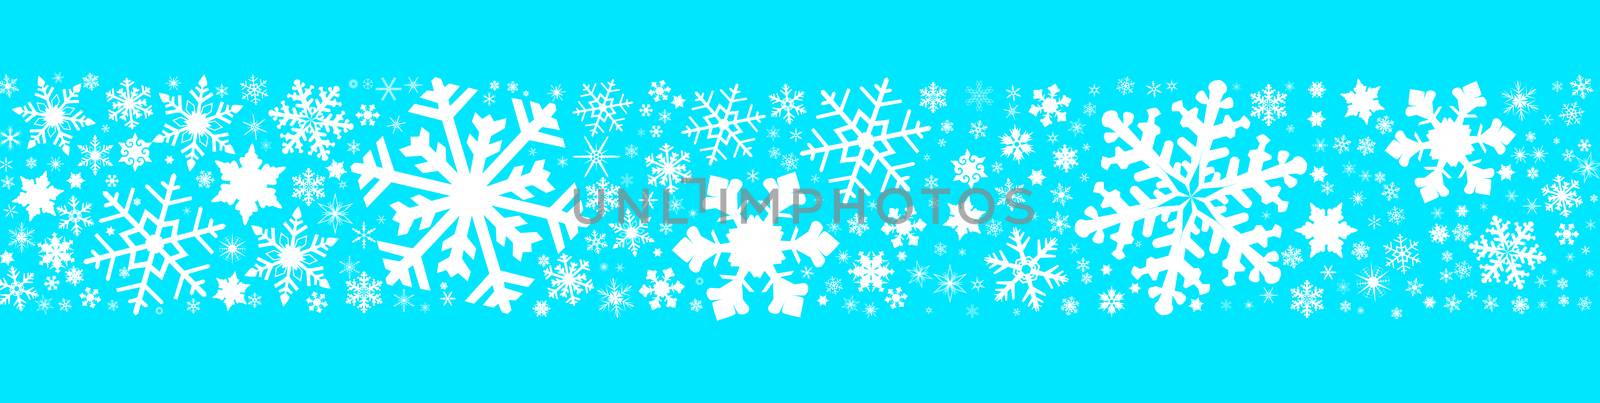 A banner of christmas snowflakes on a light blue background.